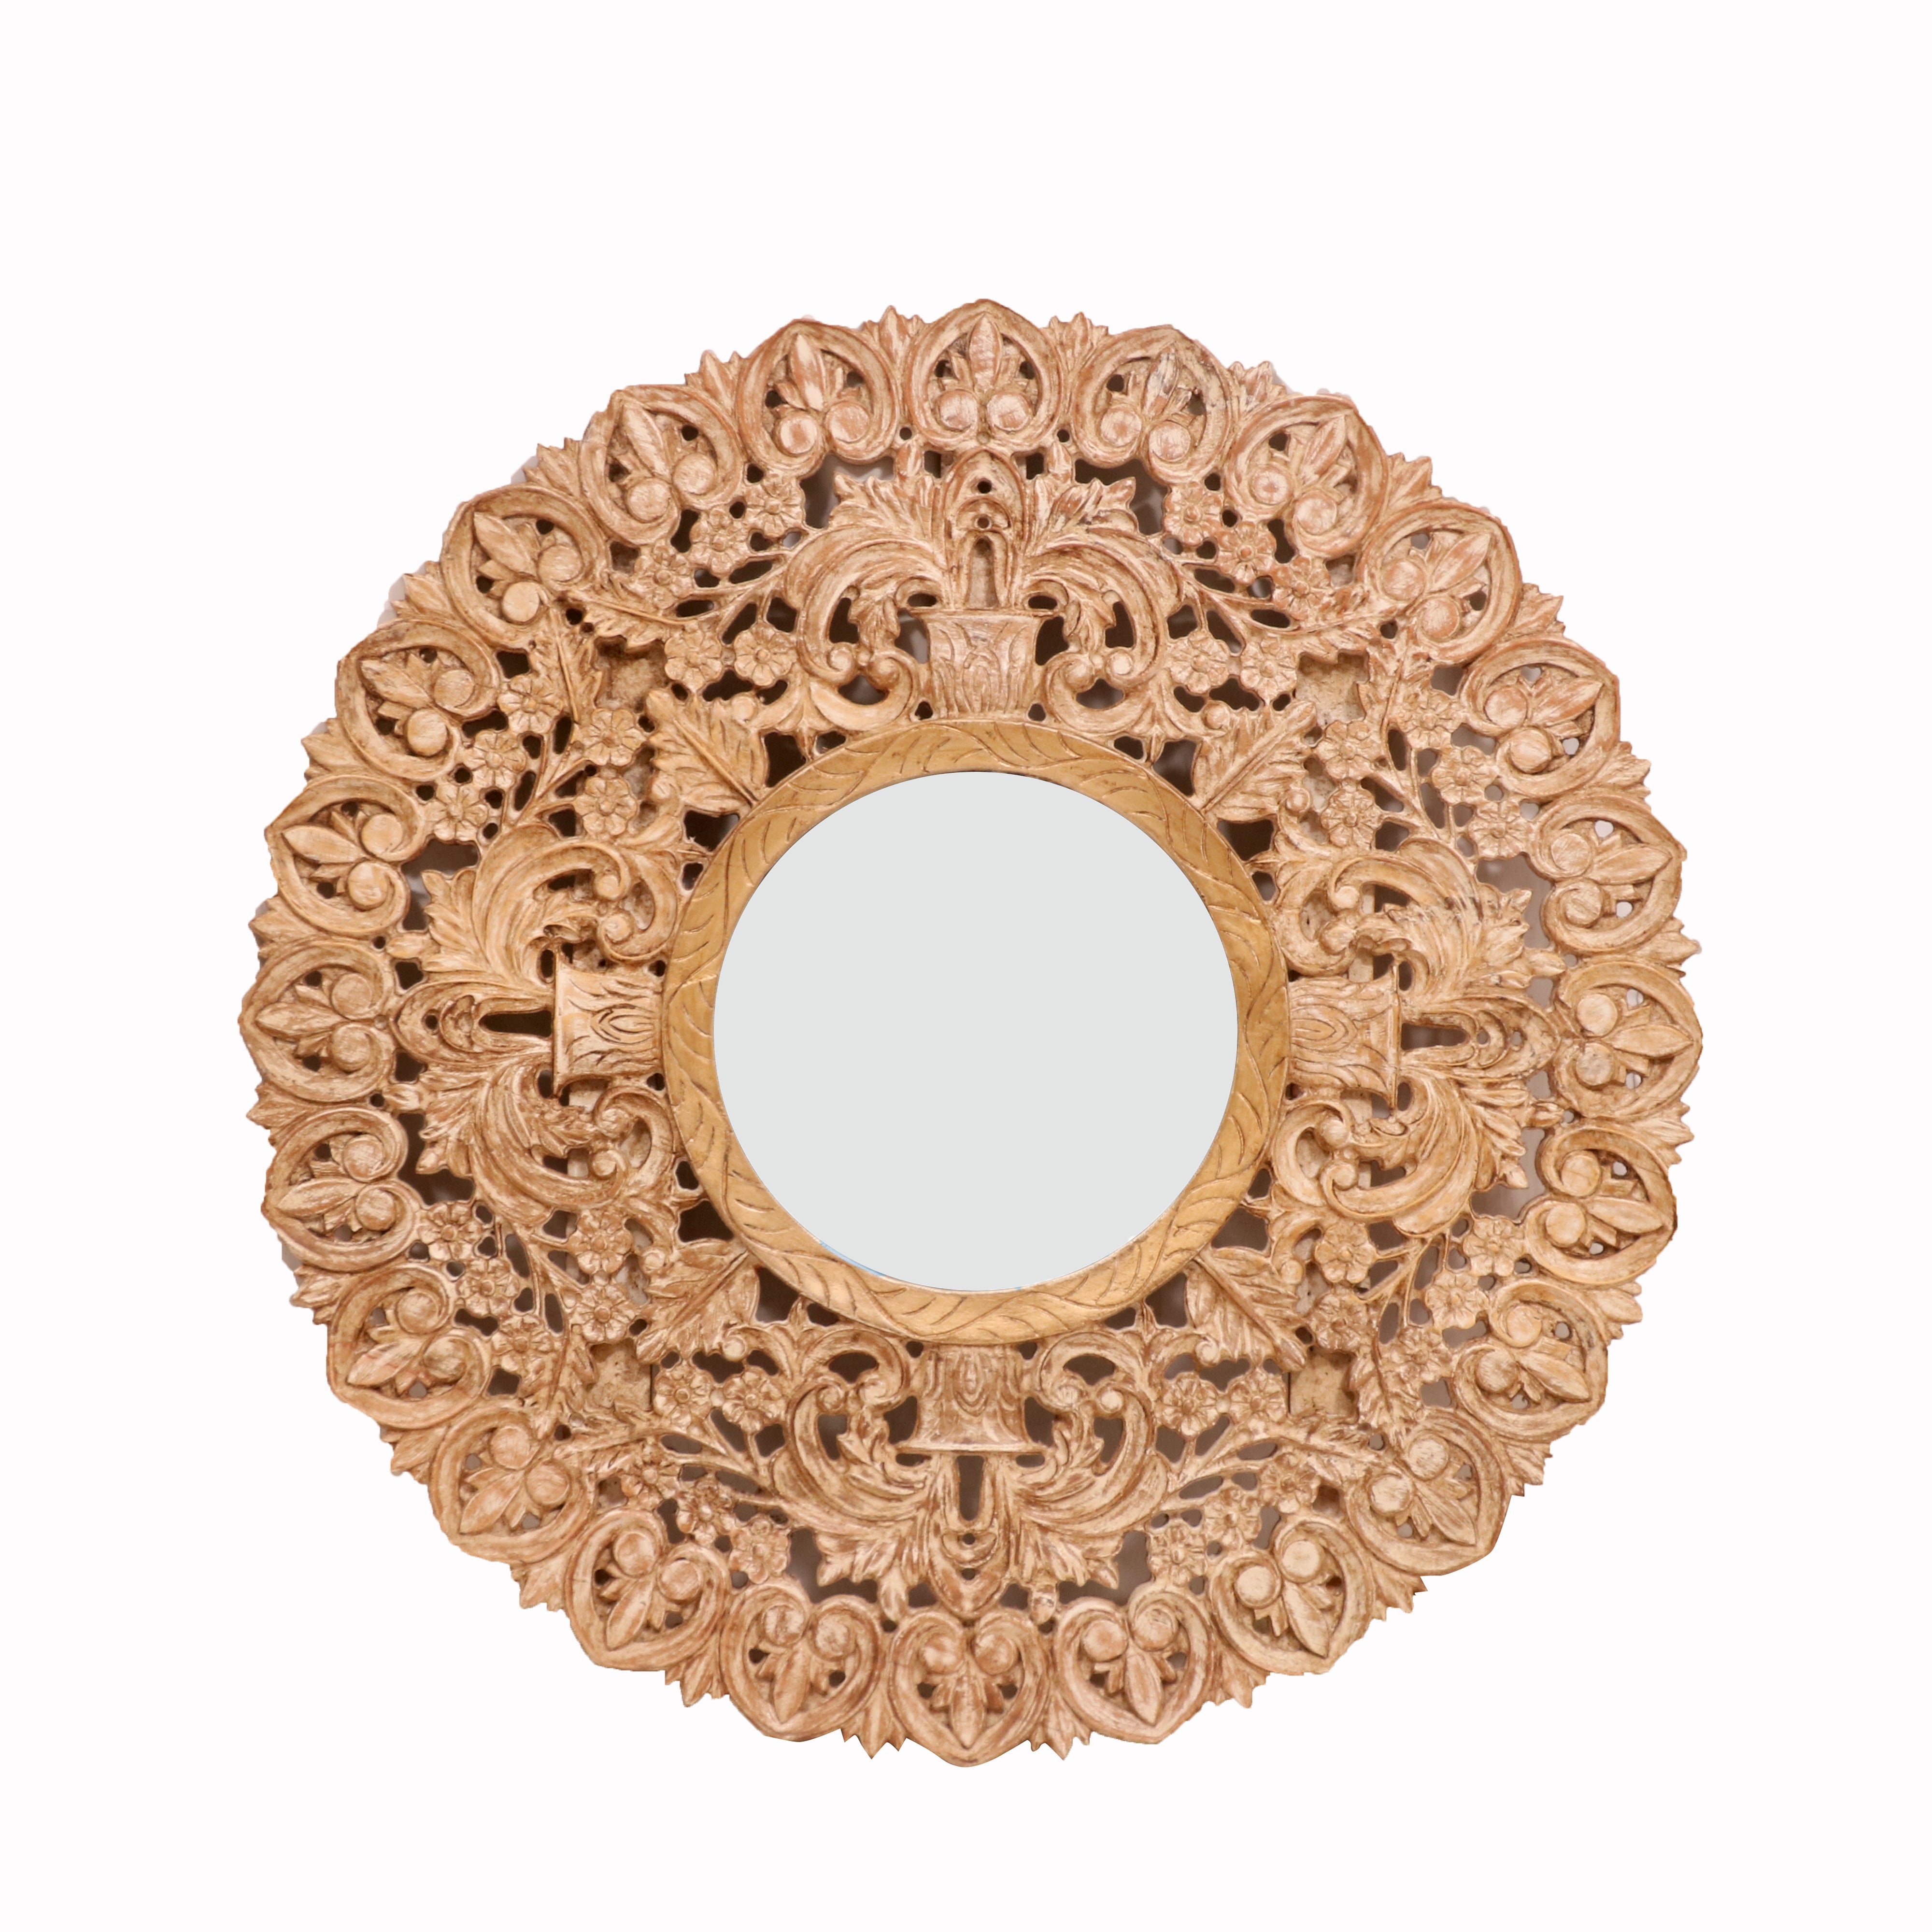 Mini Intricate Carved Wooden Mirror Mirror